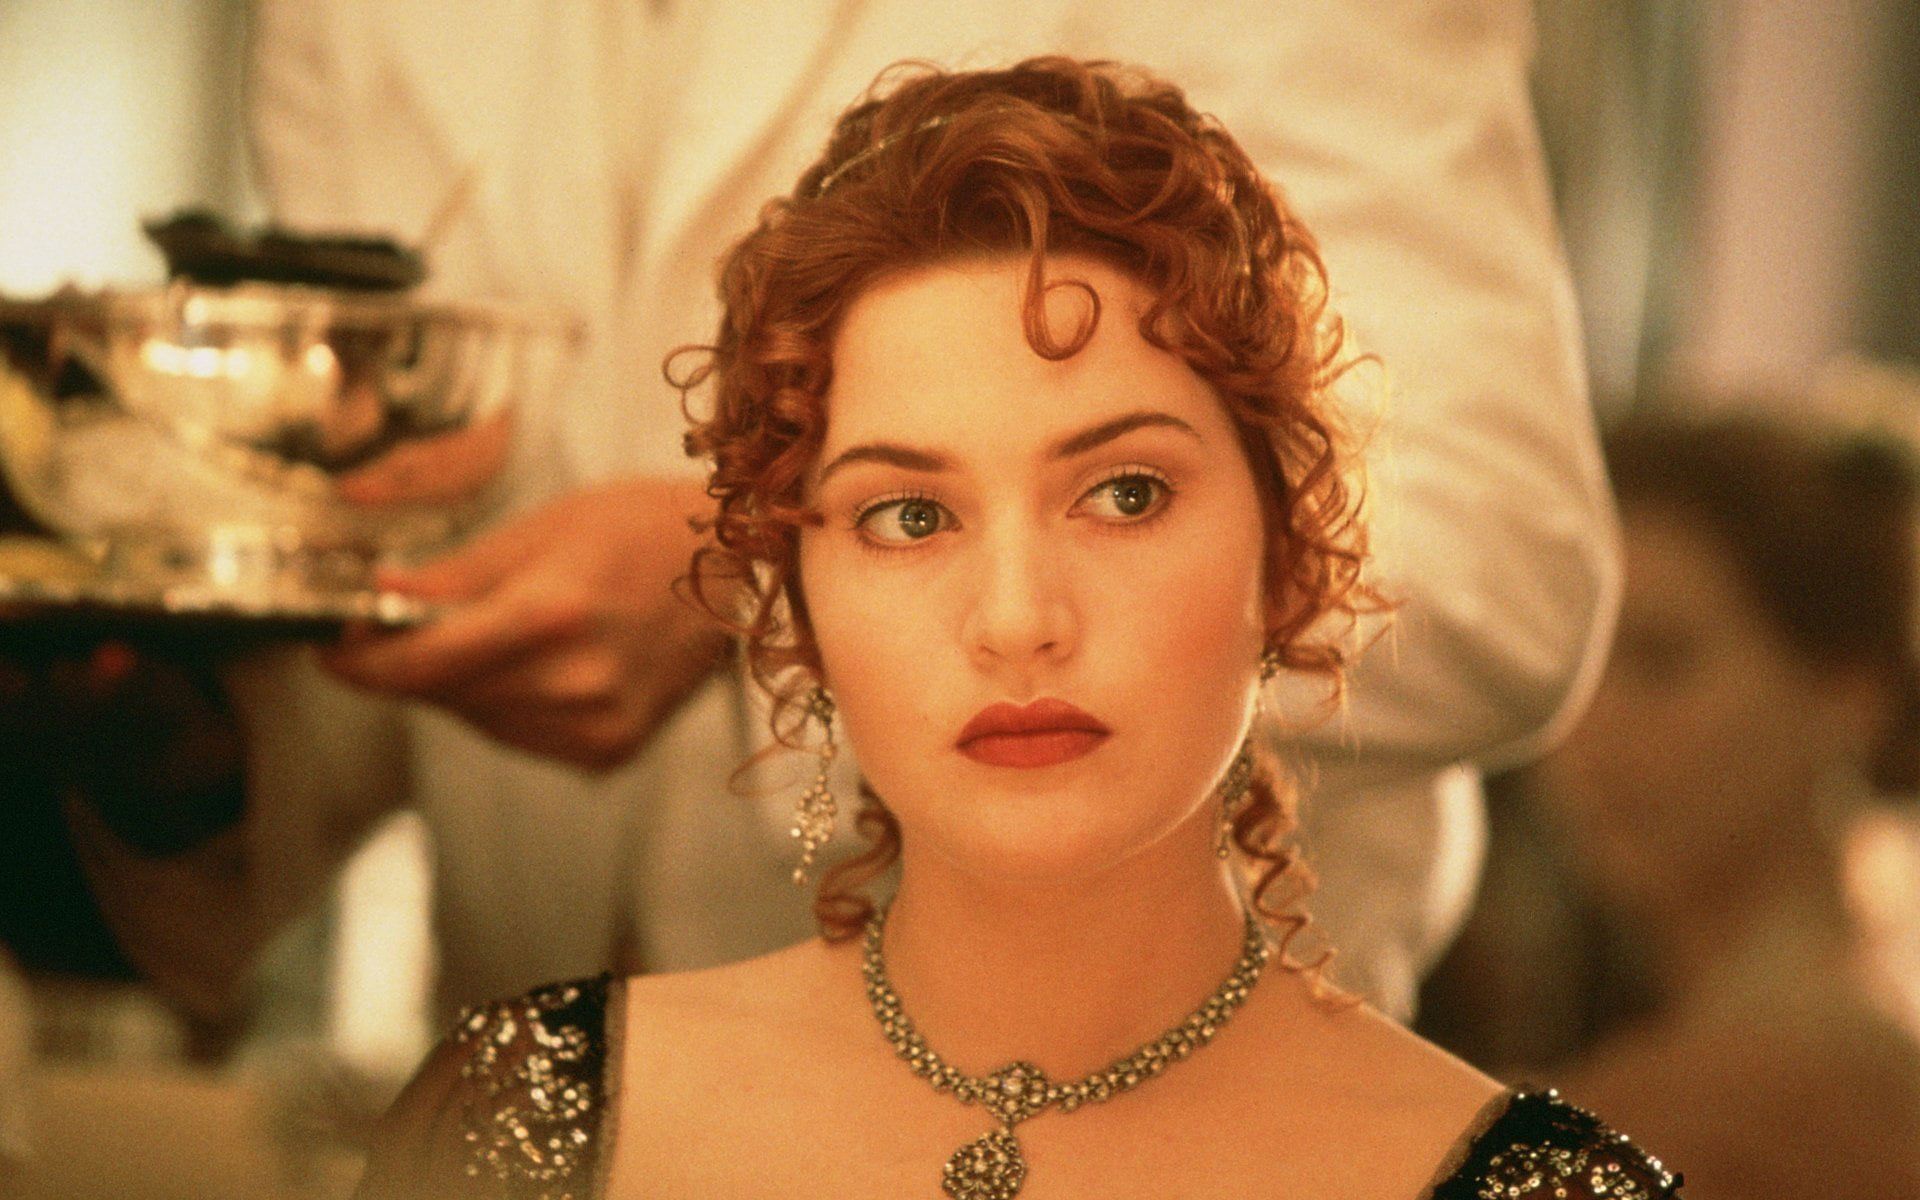 Wallpaper Rose From Titanic Movie, Kate Winslet • Wallpaper For You HD Wallpaper For Desktop & Mobile